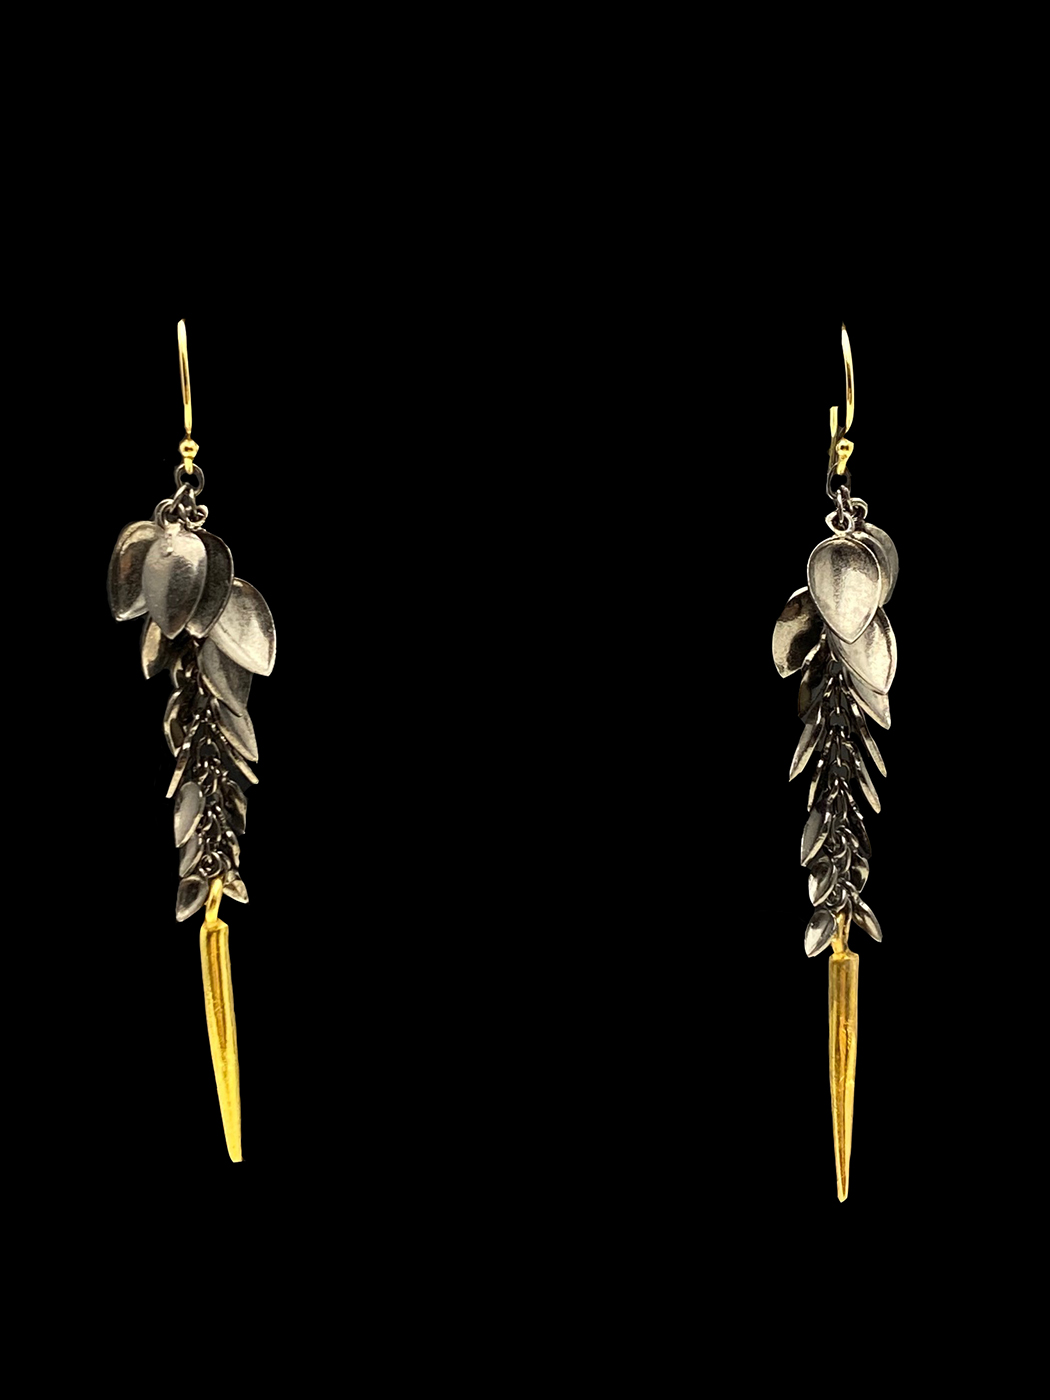 Oxidized Sterling Silver and Gold Vermeil Earrings